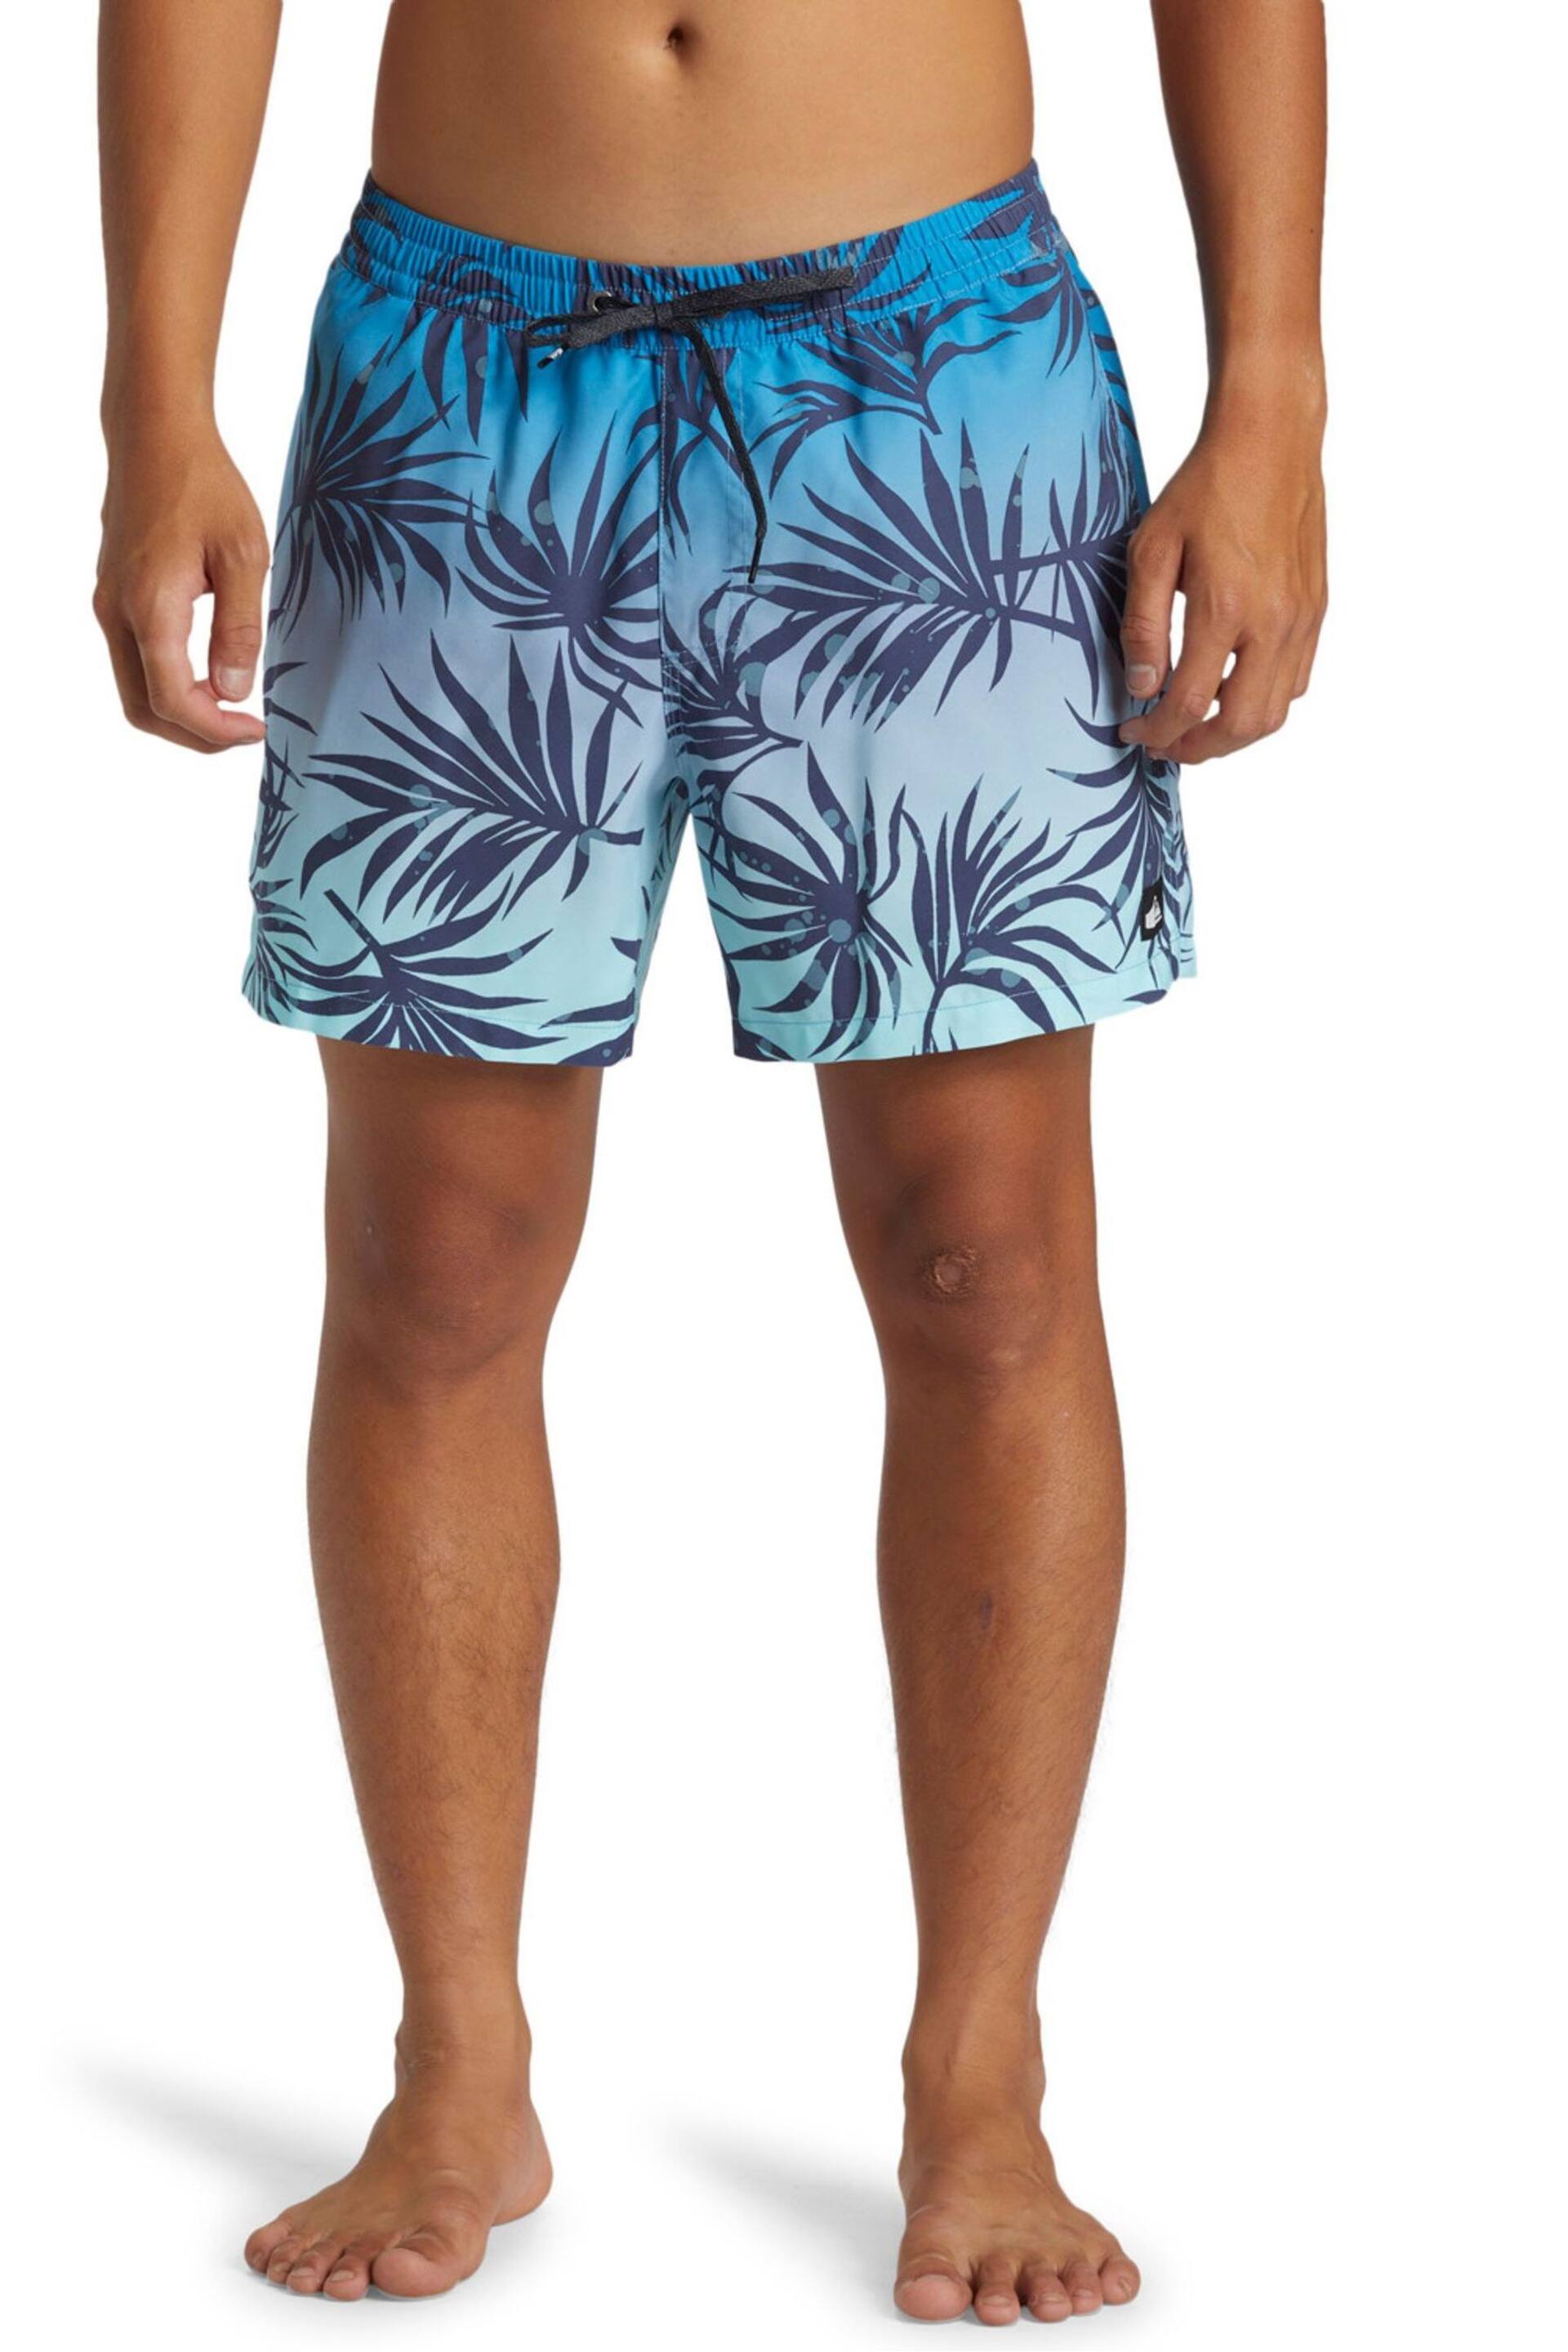 Quiksilver Blue Gradient Leaf Print Volley Shorts - Image 1 of 7